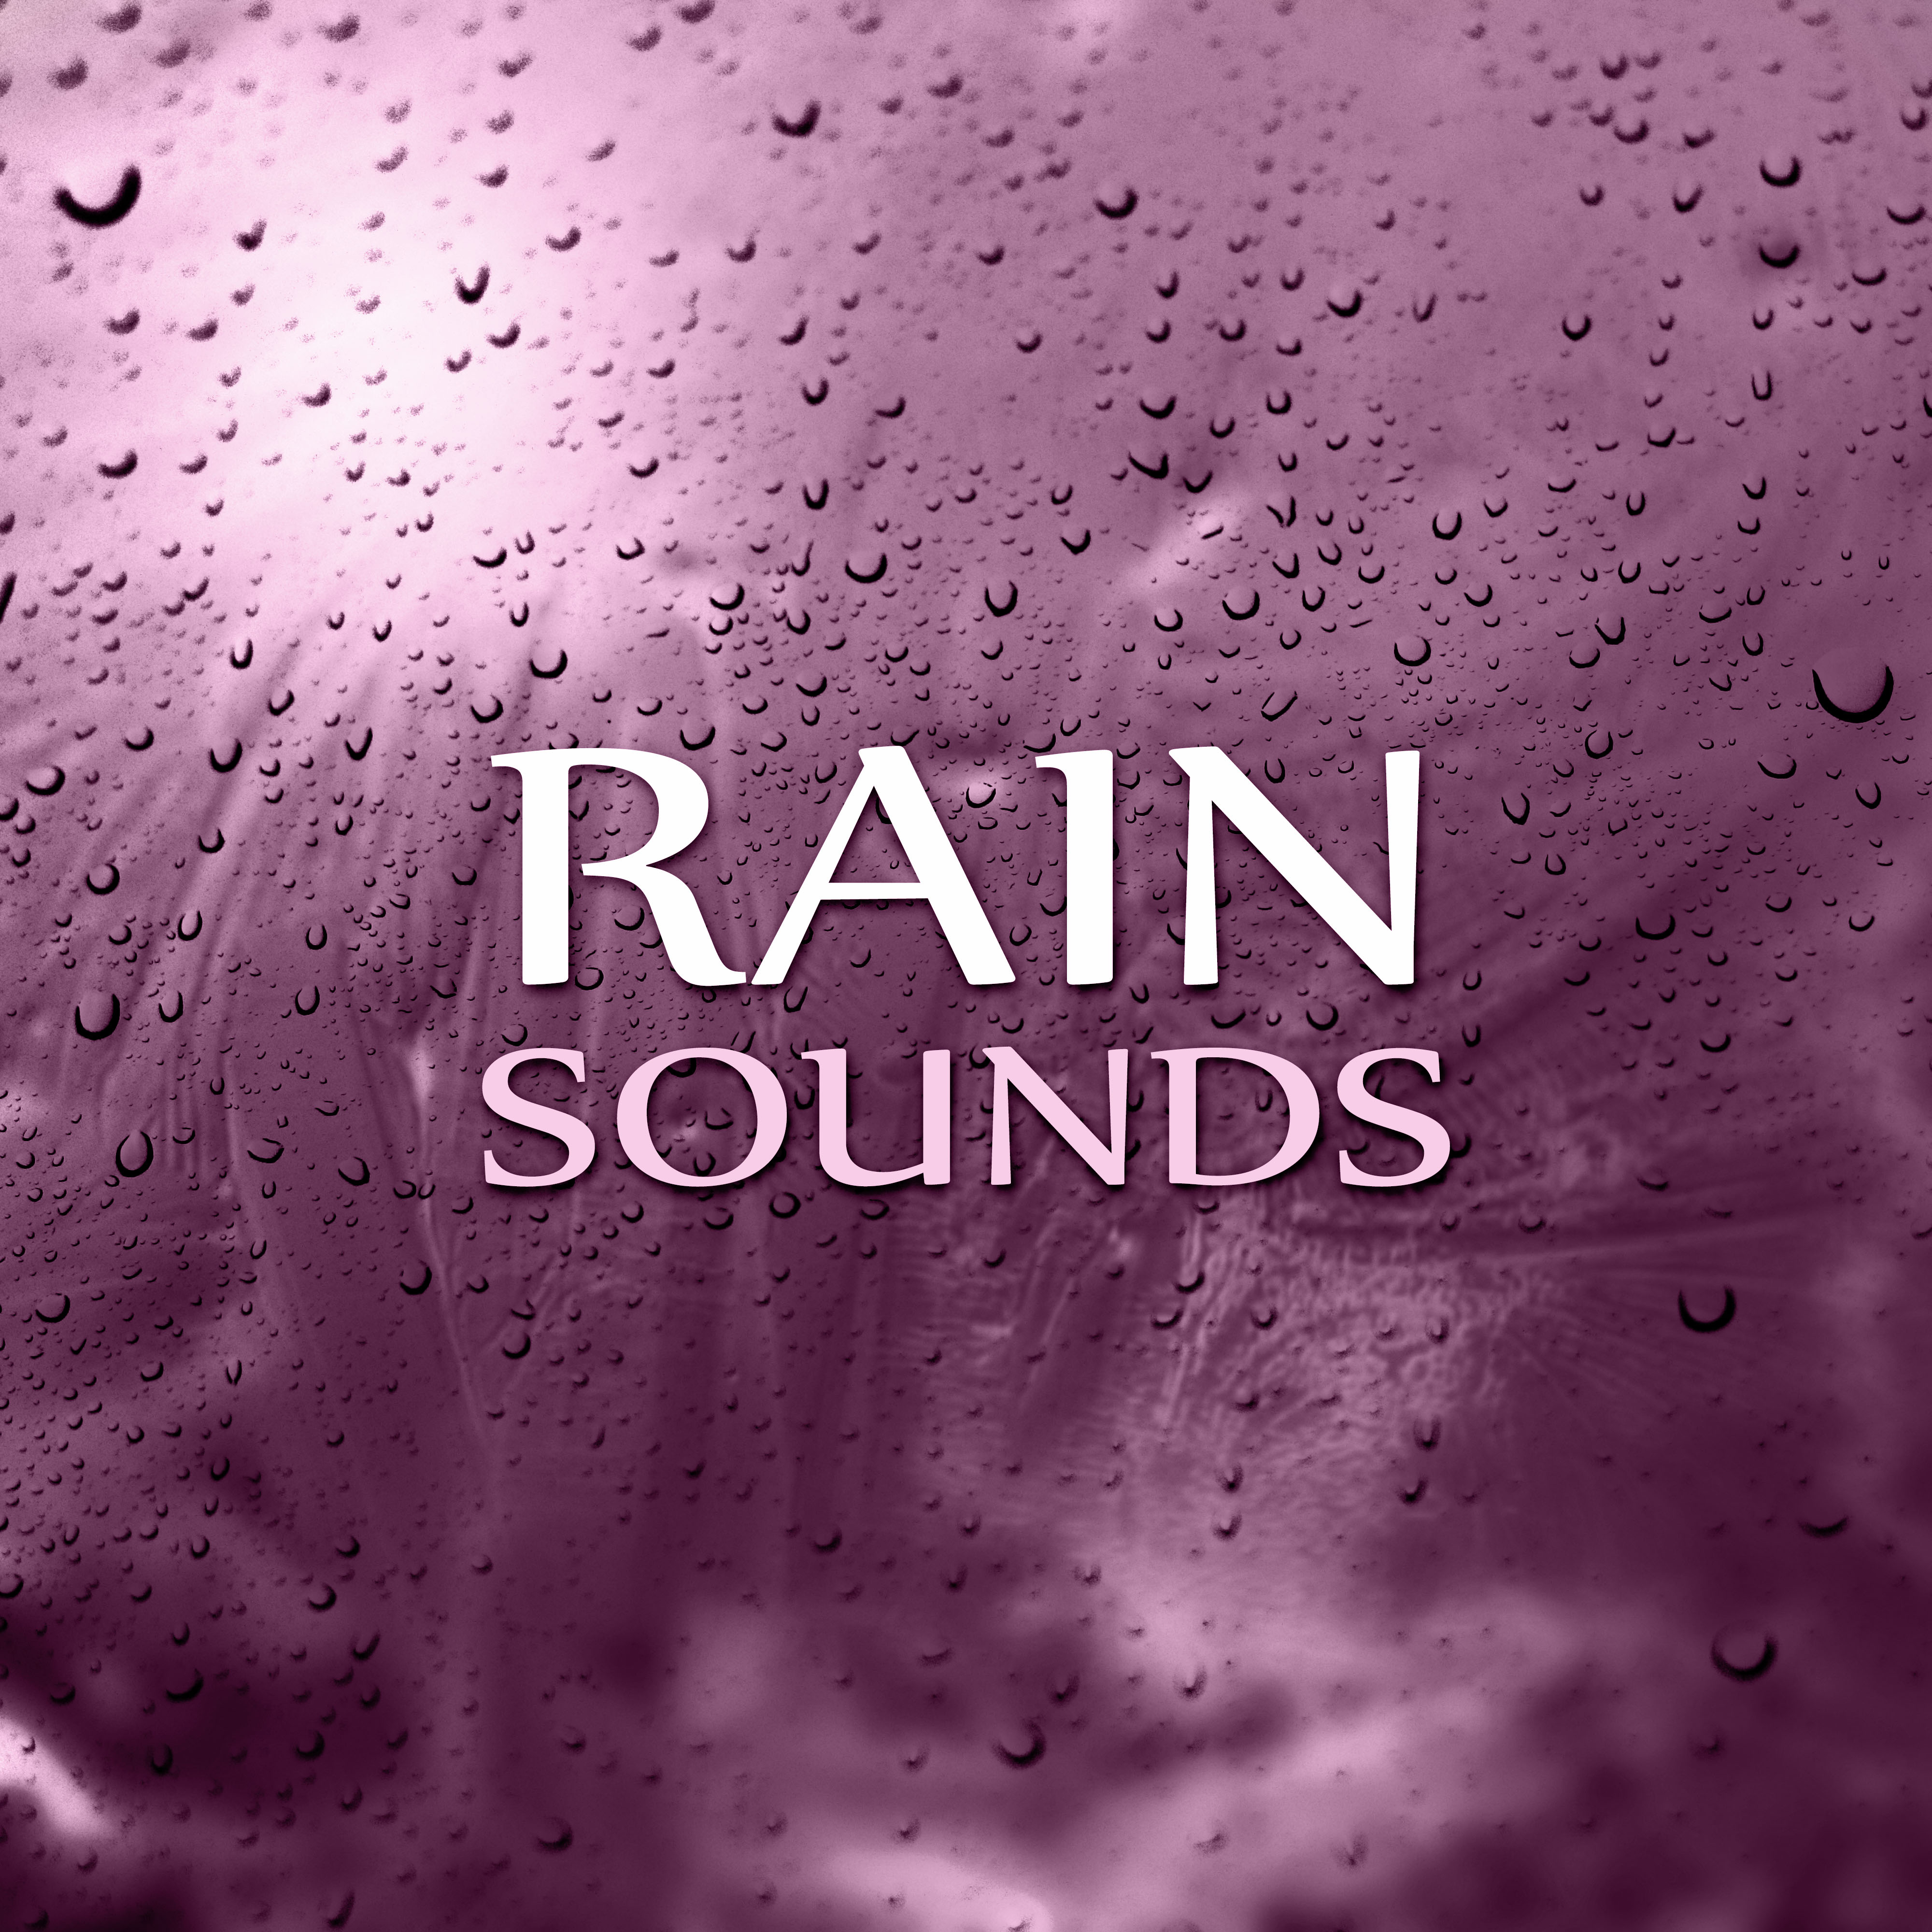 Rain Sounds  Rain Forest, Pacific Ocean Waves, Sound Therapy Music for Relaxation Meditation with Sounds of Nature